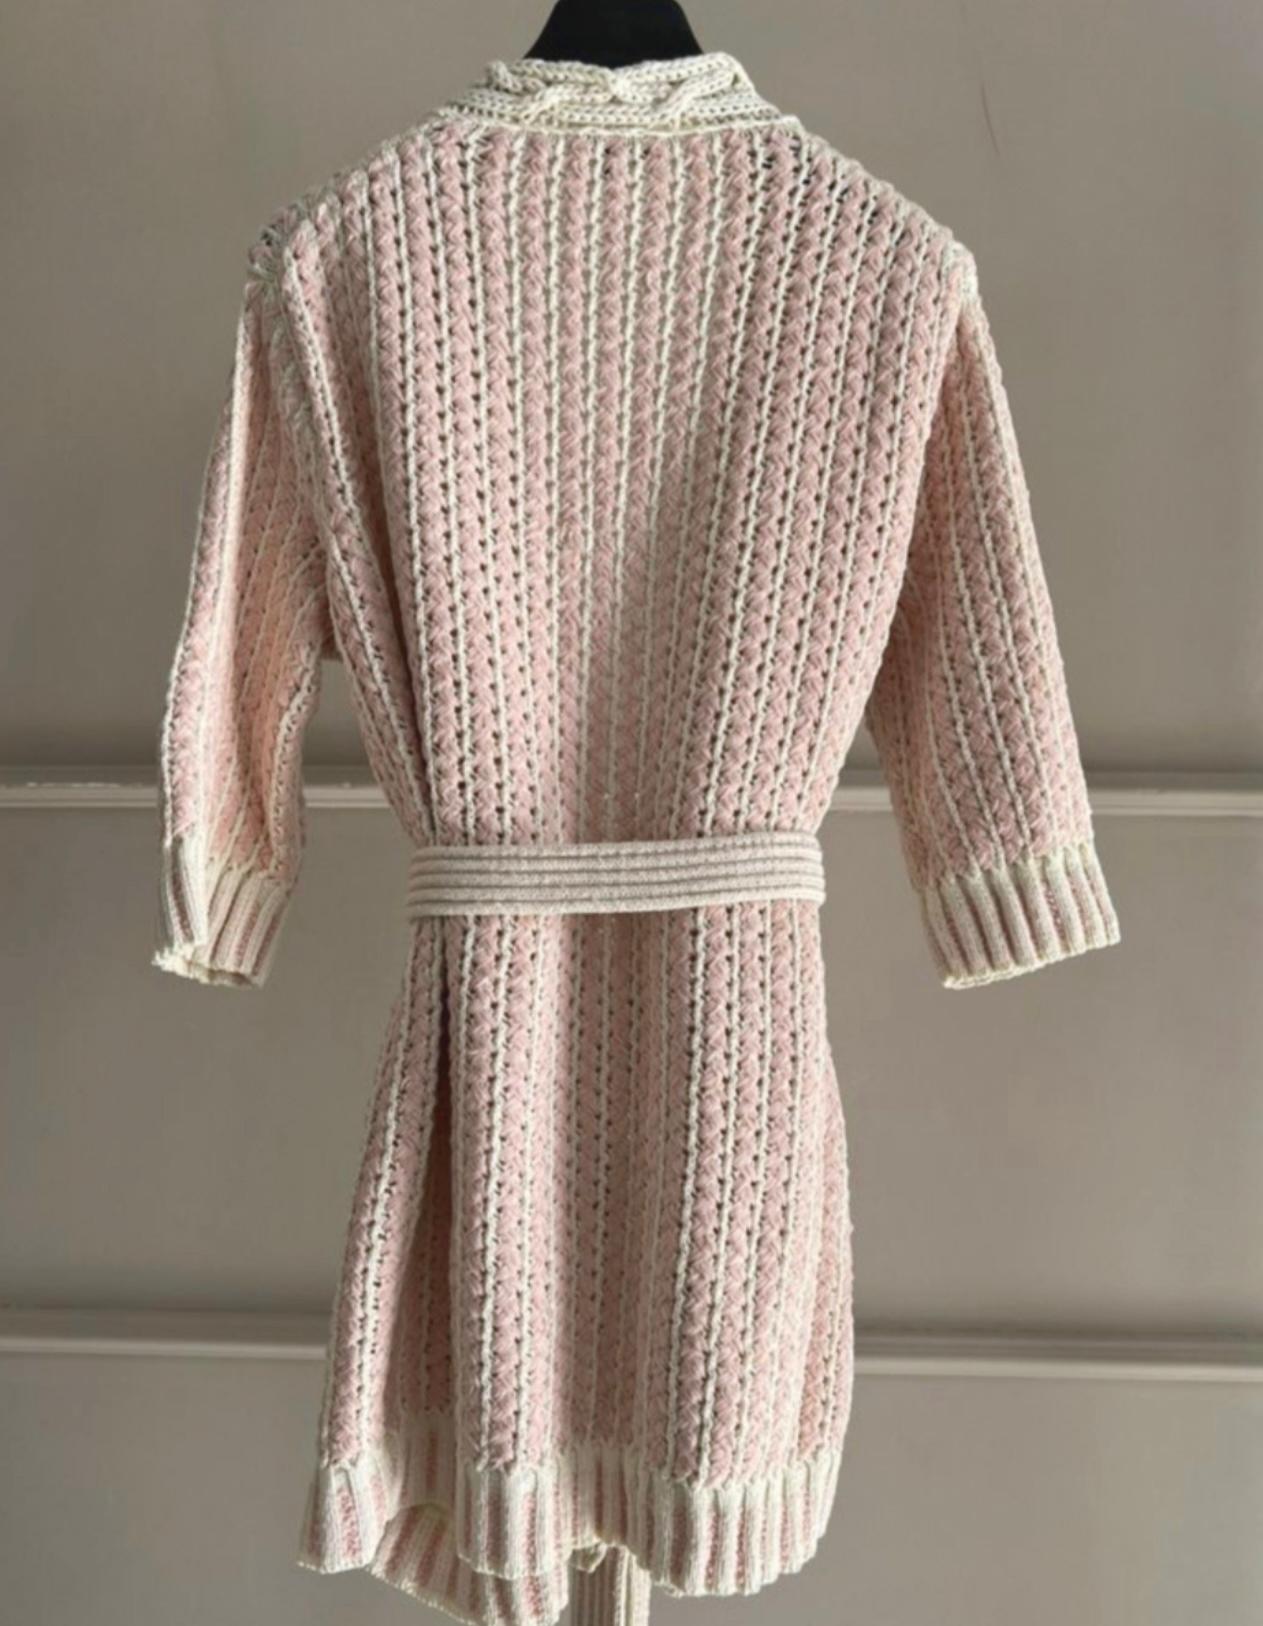 Chanel 2021 Spring Woven Tweed Belted Suit 1